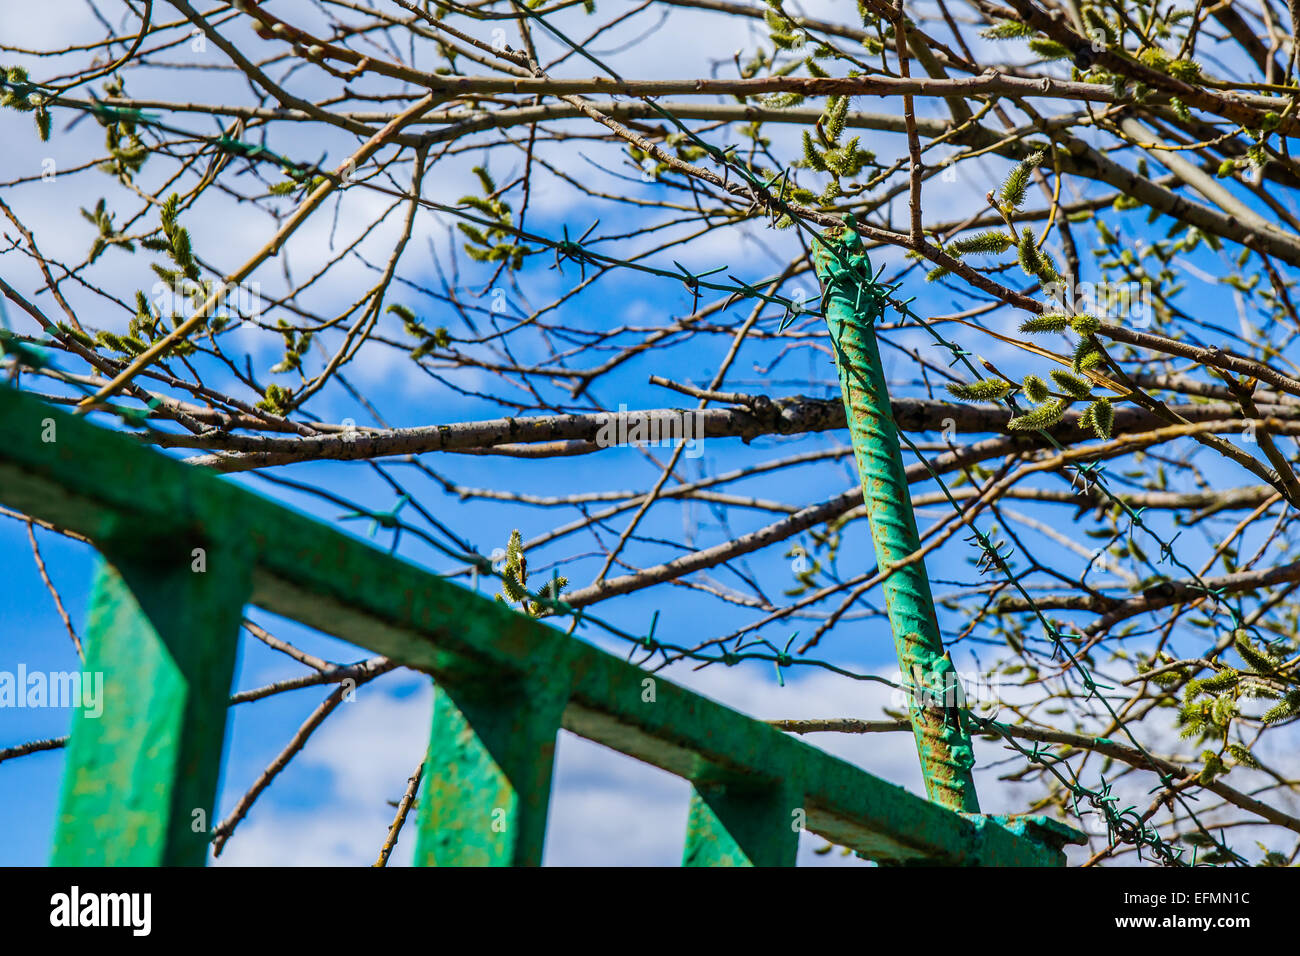 Spring is everywhere - unfolding leaves of a tree, a fence and barbed wire of green color Stock Photo